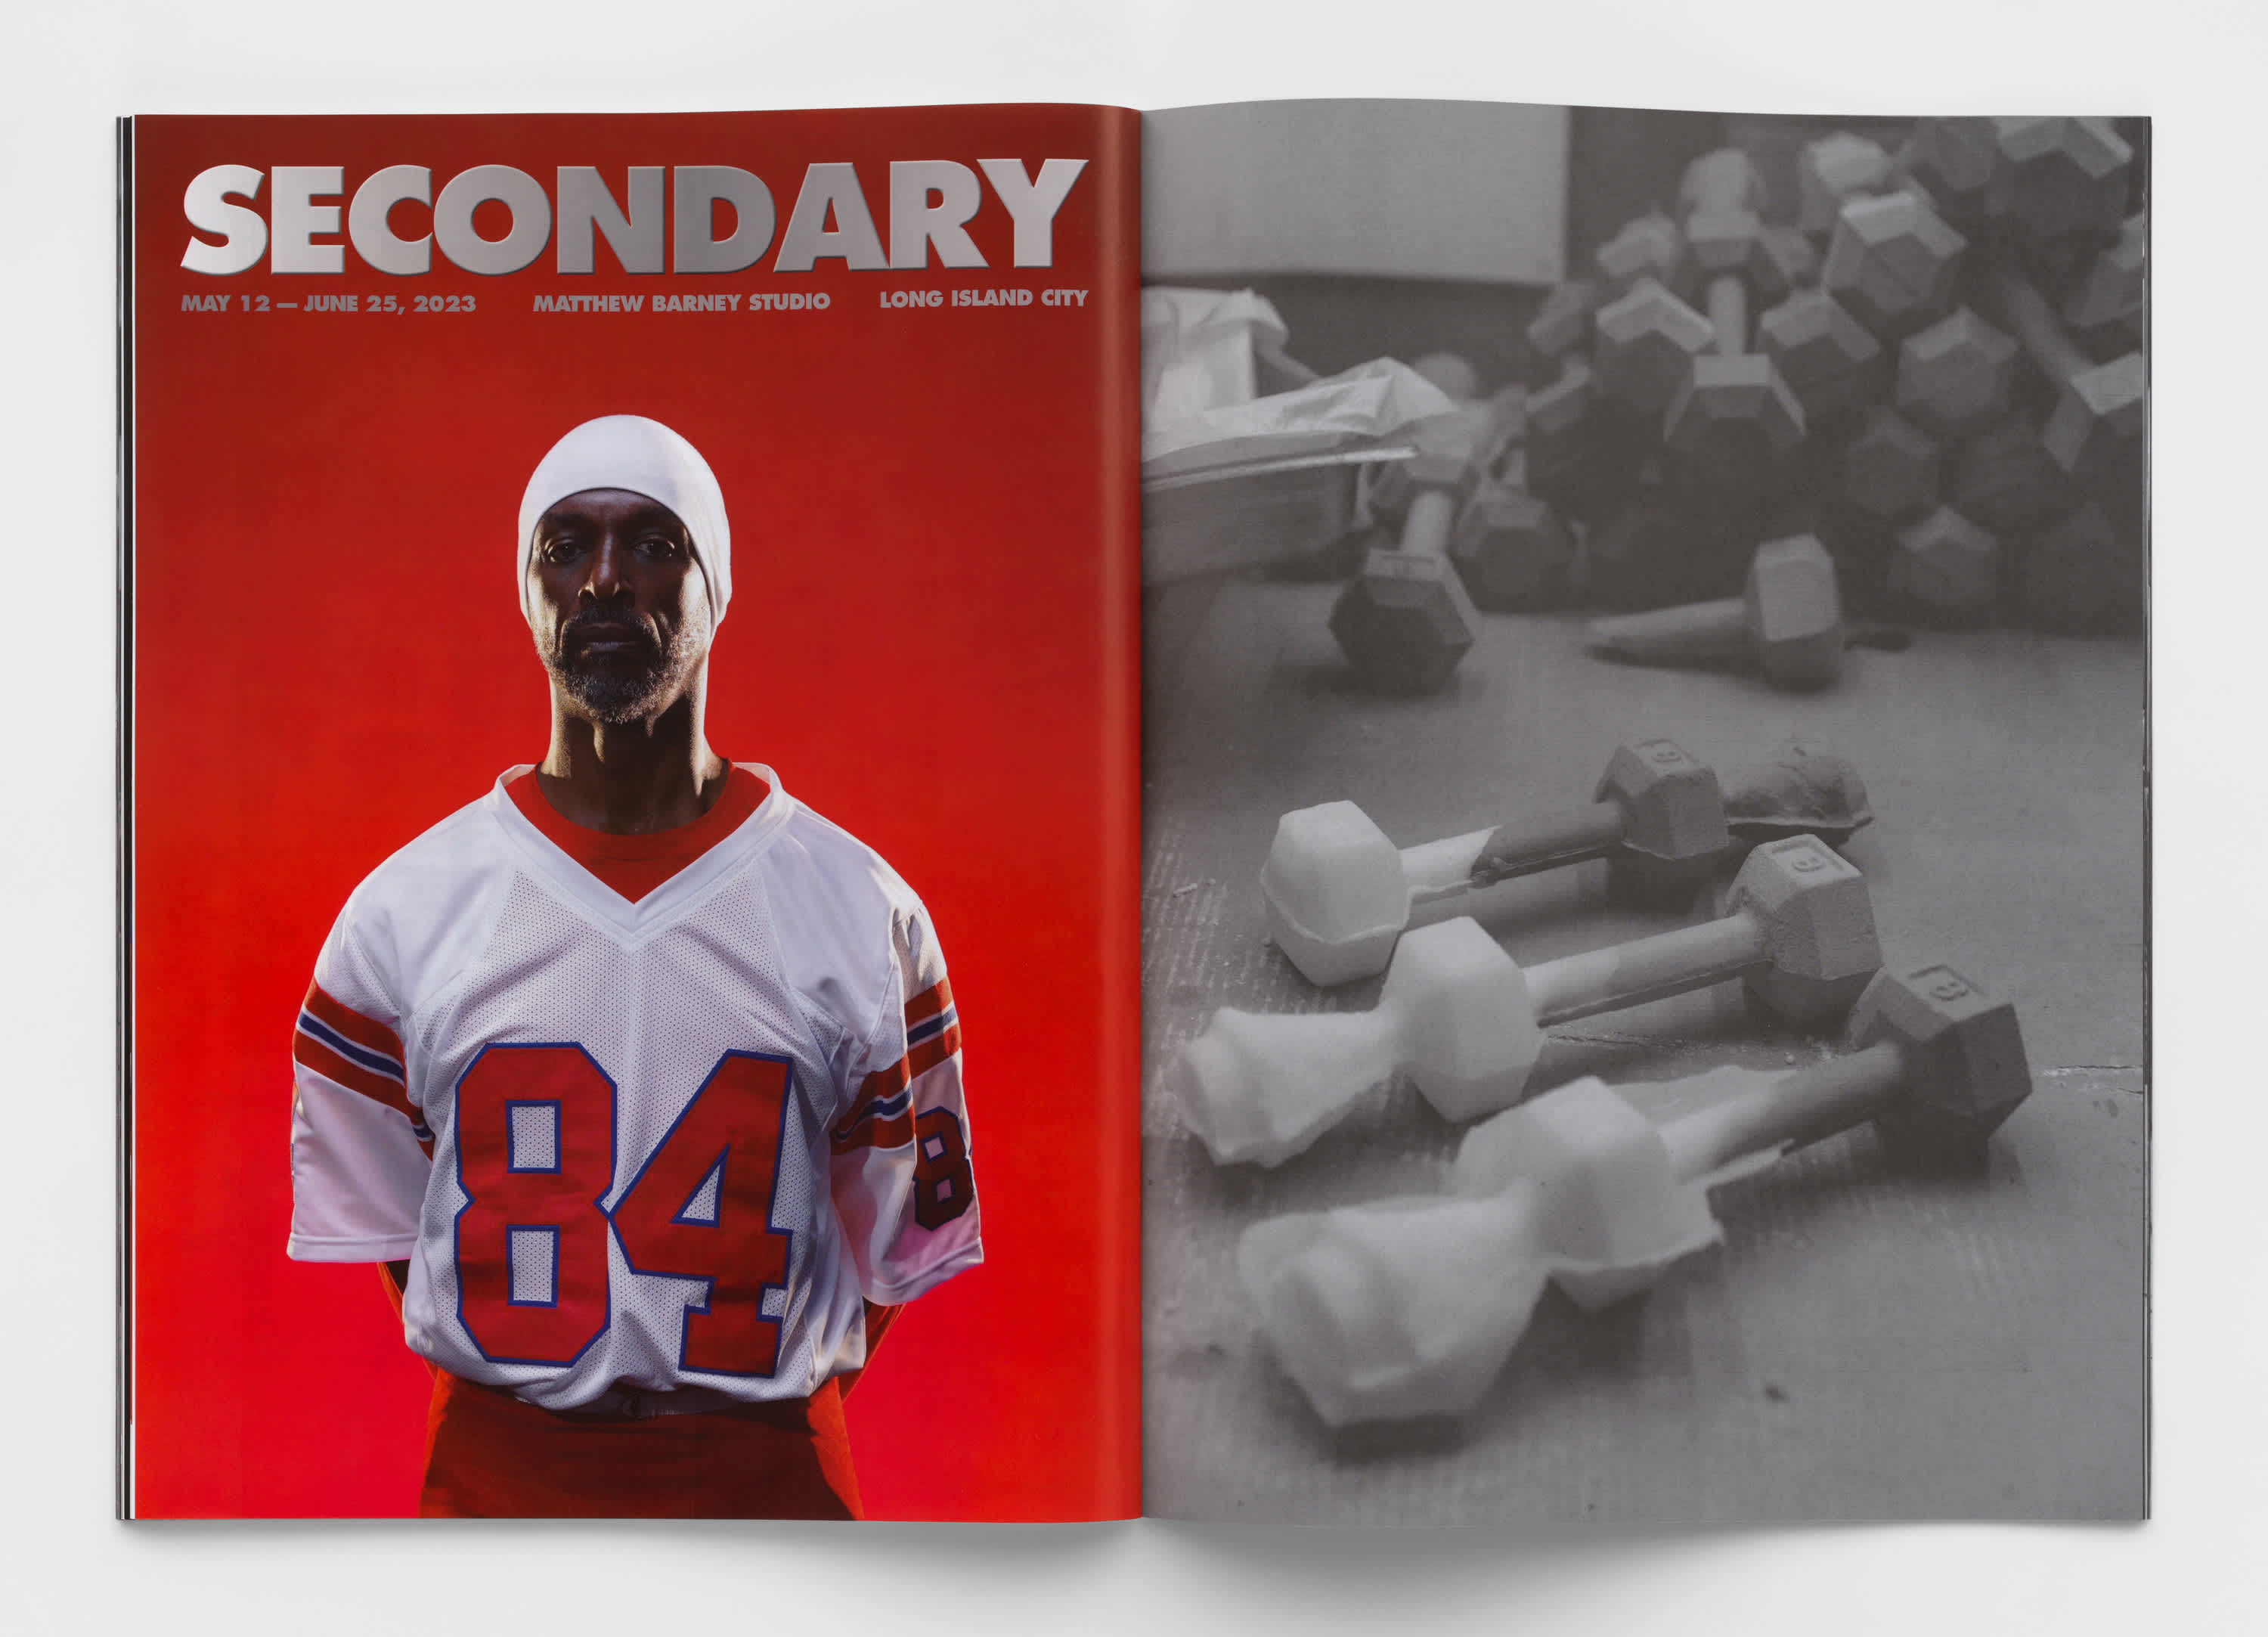 Two page book spread. The left page features a football player standing in front of a red background, the title 'Secondary' is above his head. The right page is a black and white photograph of cast dumbbells on the floor. 